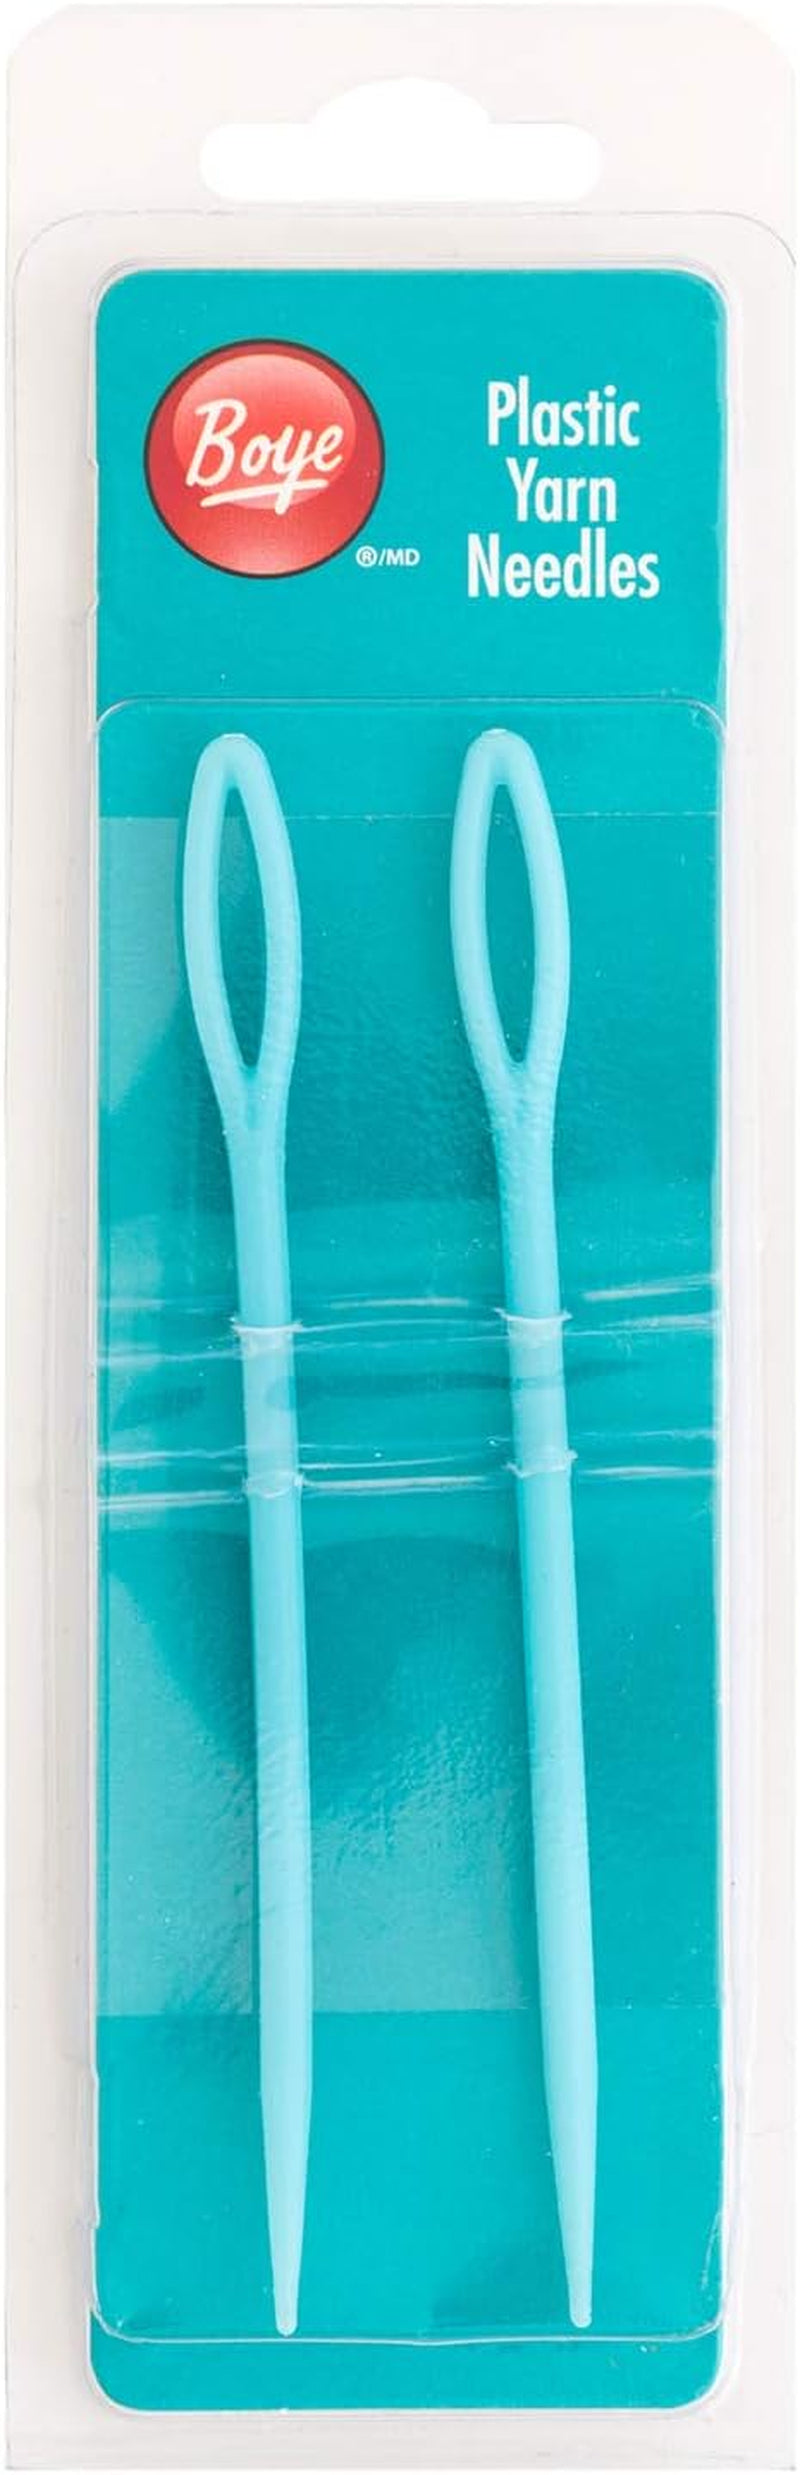 Plastic Yarn Sewing Needle Set ,Blue, 2 Count ( Pack of 1)